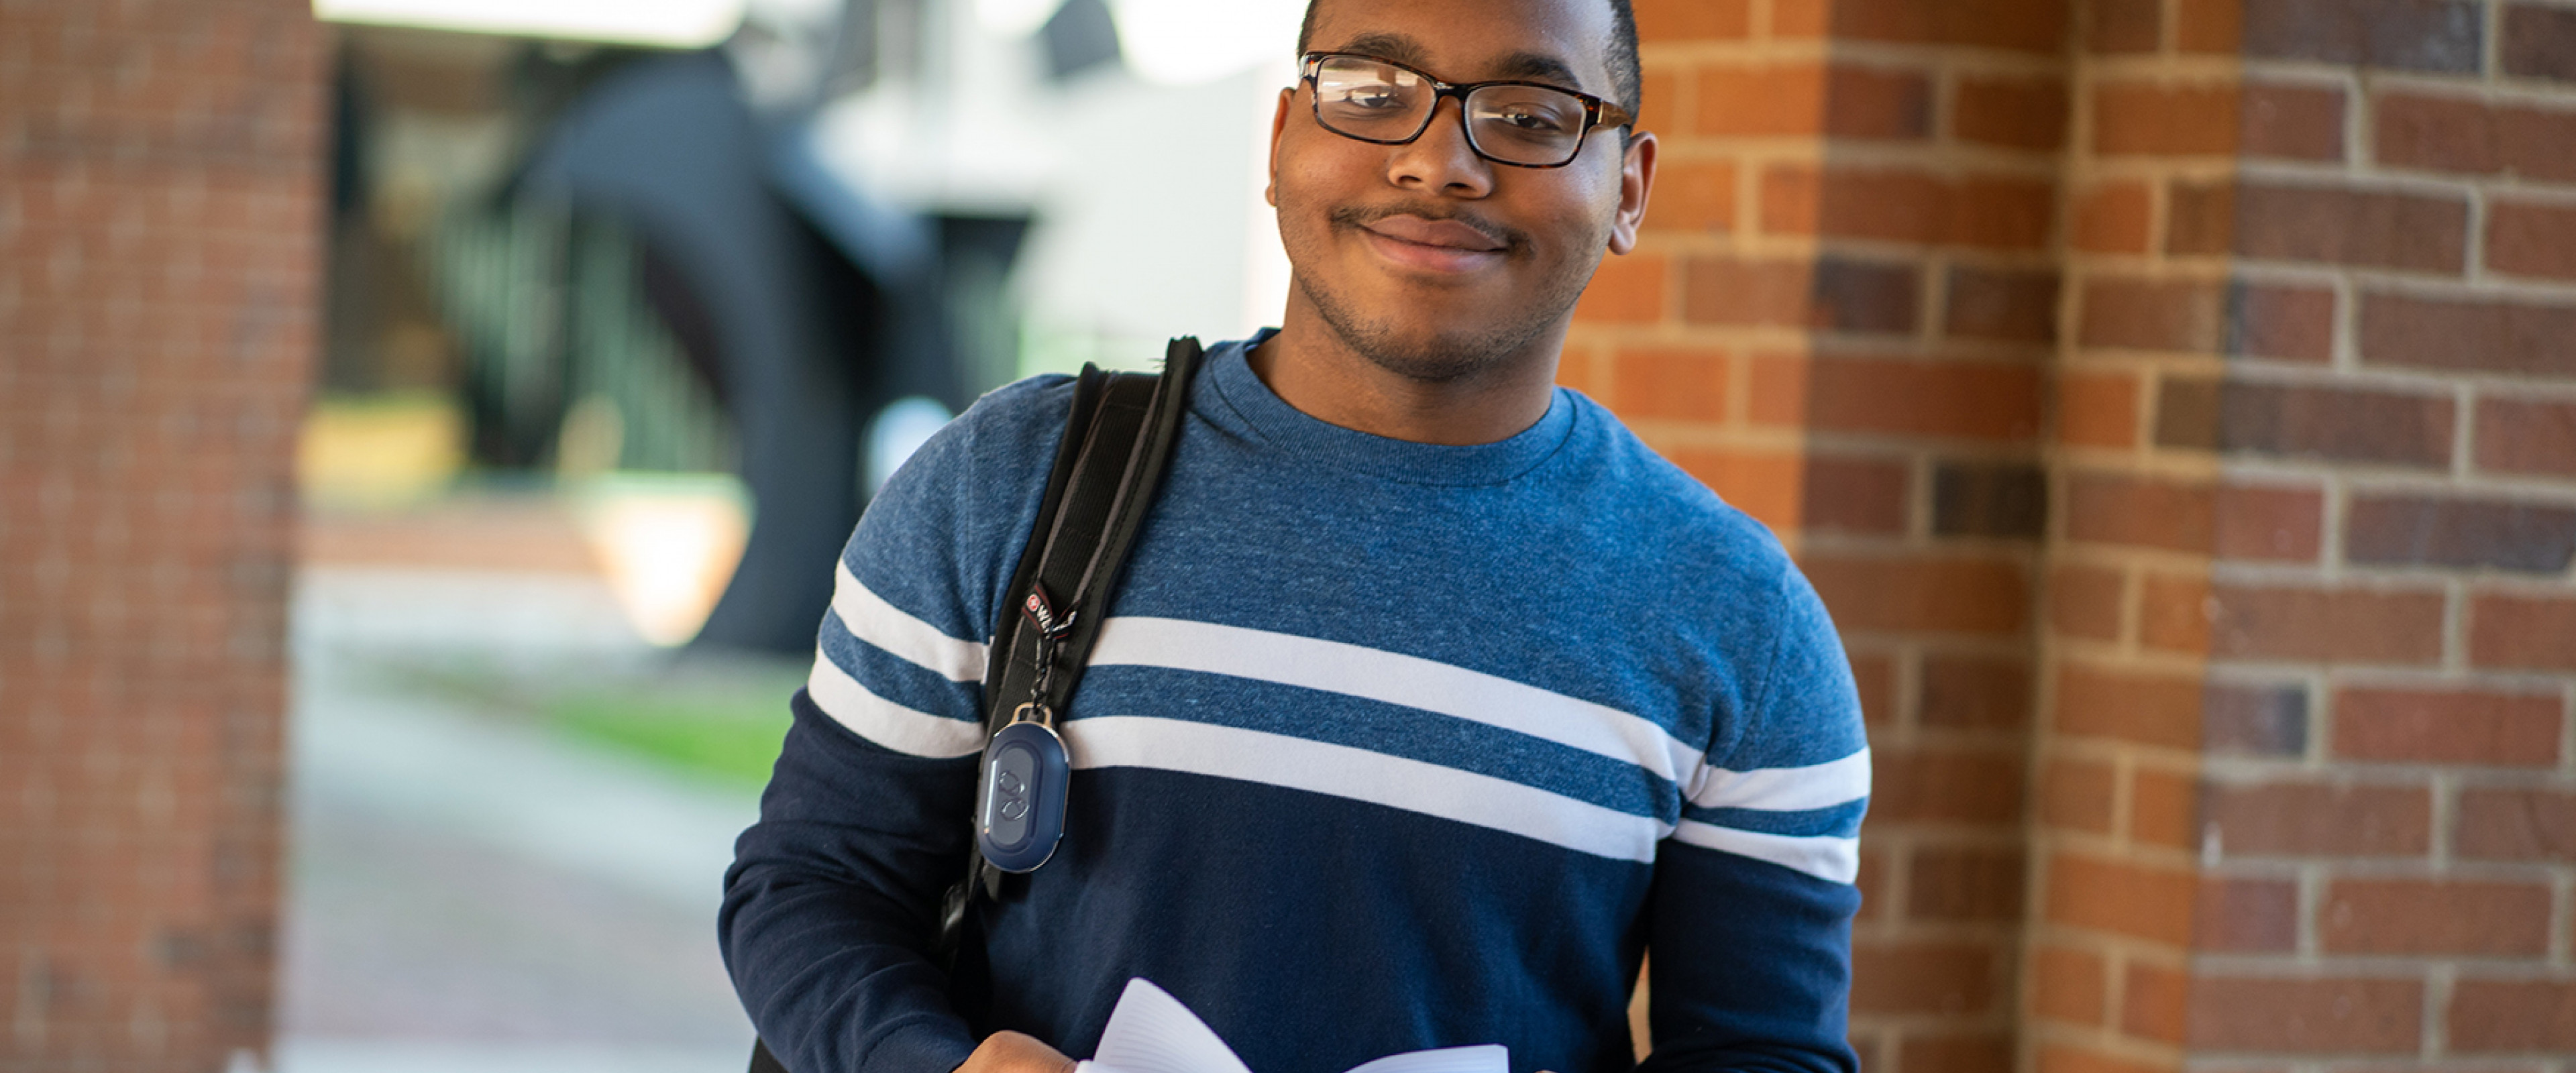 Pictured is a student standing outside of the business college holding a book and smiling